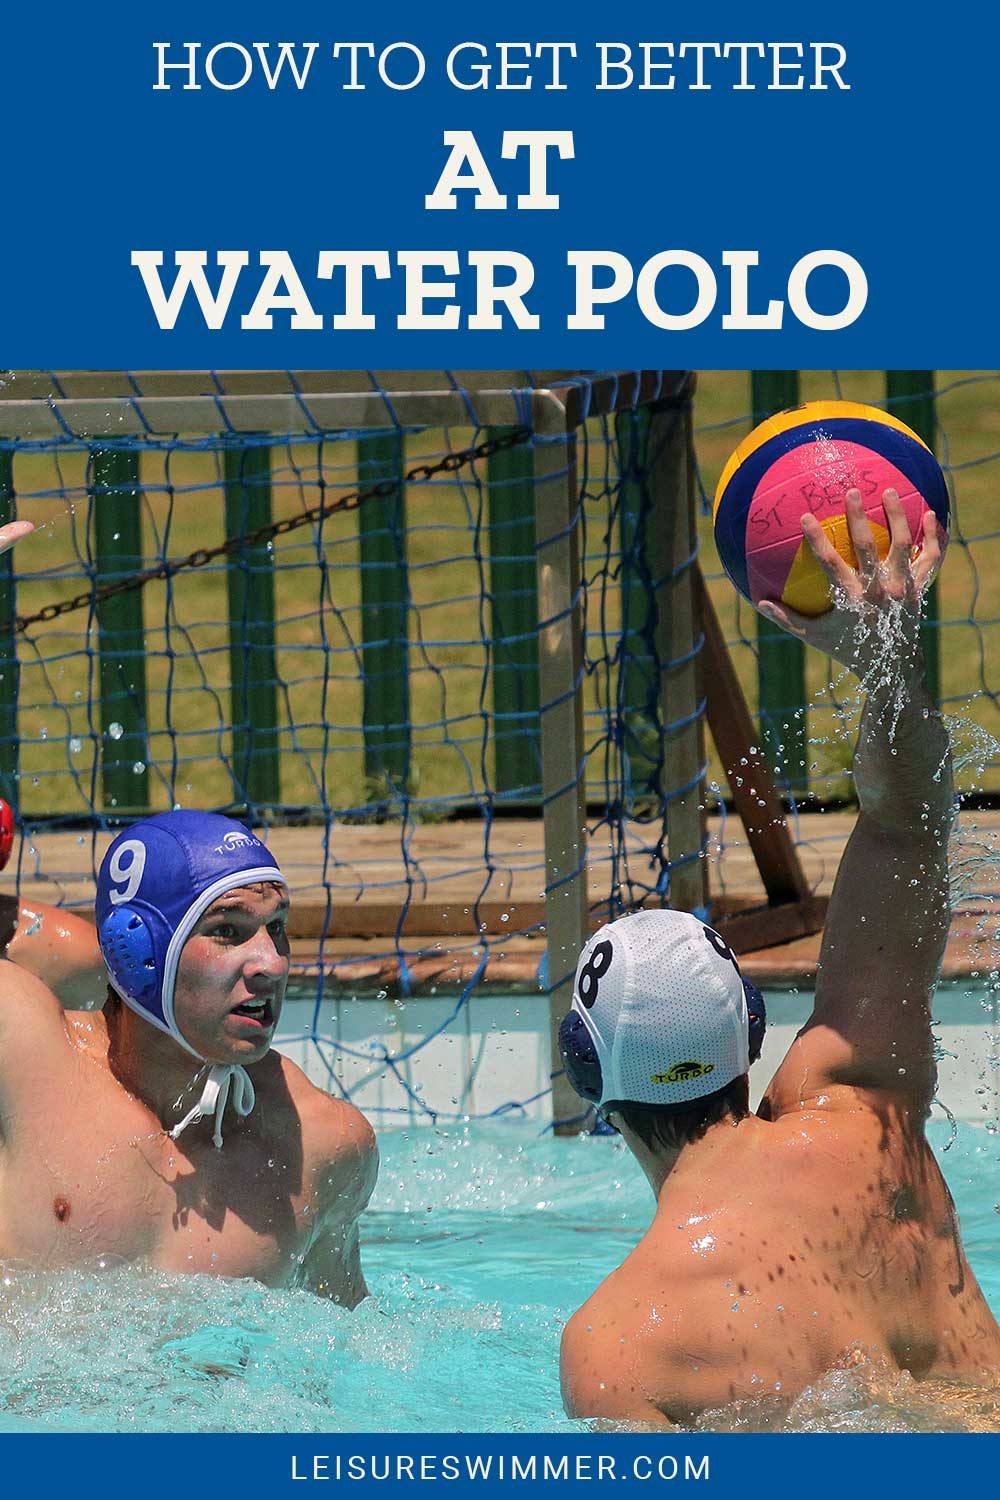 Men playing water polo - Getting Better At Water Polo.